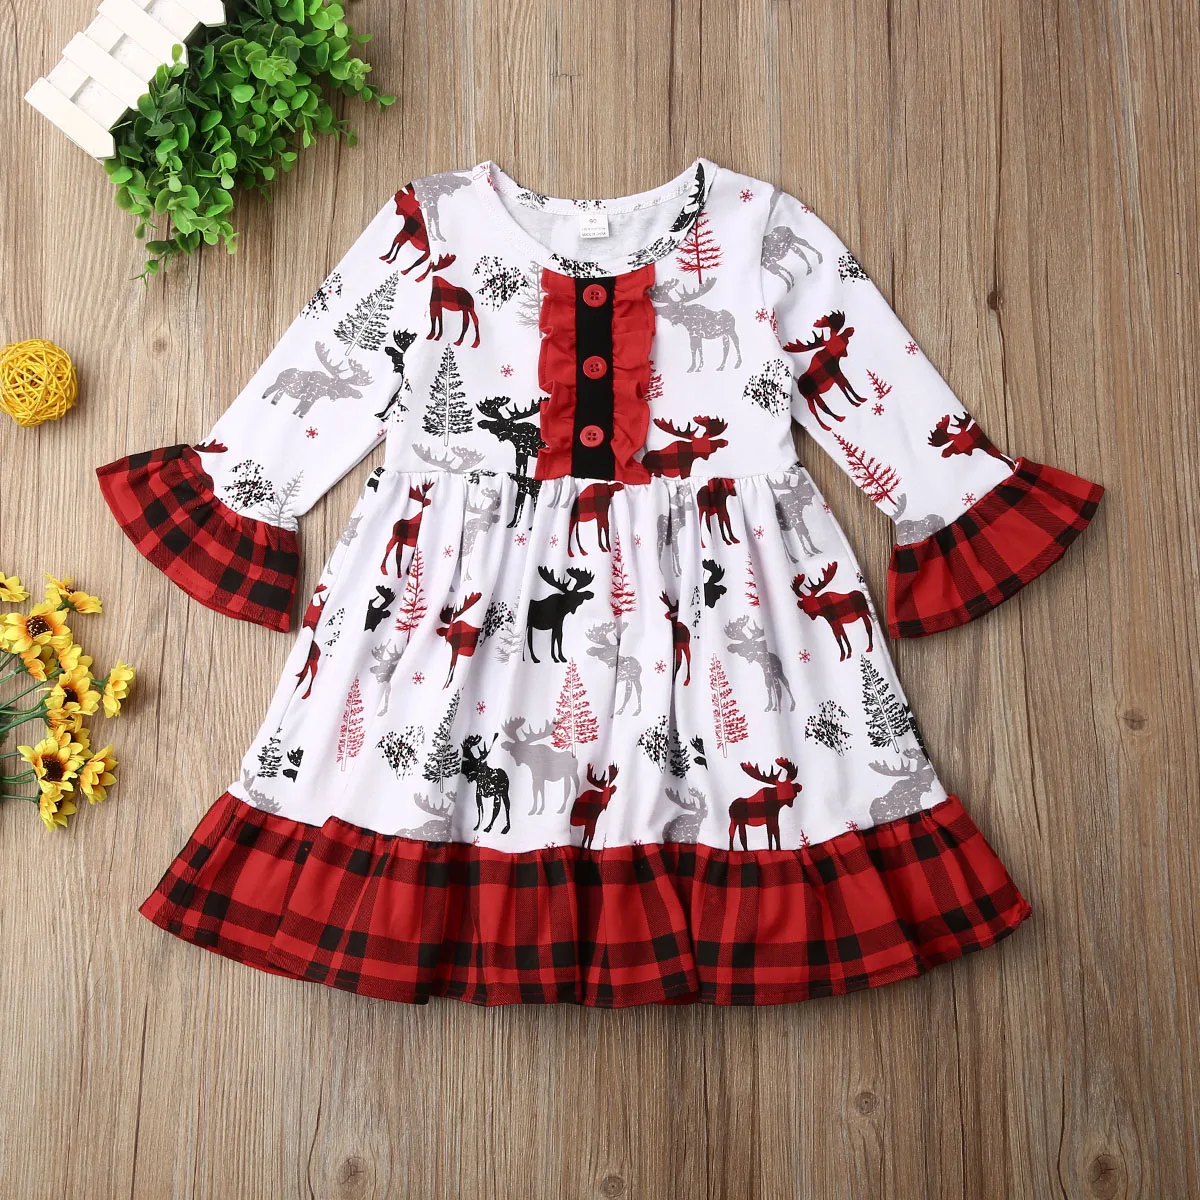 Girl Dress Cute Toddler Baby Girls Kids Winter Princess Christmas Dress Party Dresses Outfits Size 2-6T